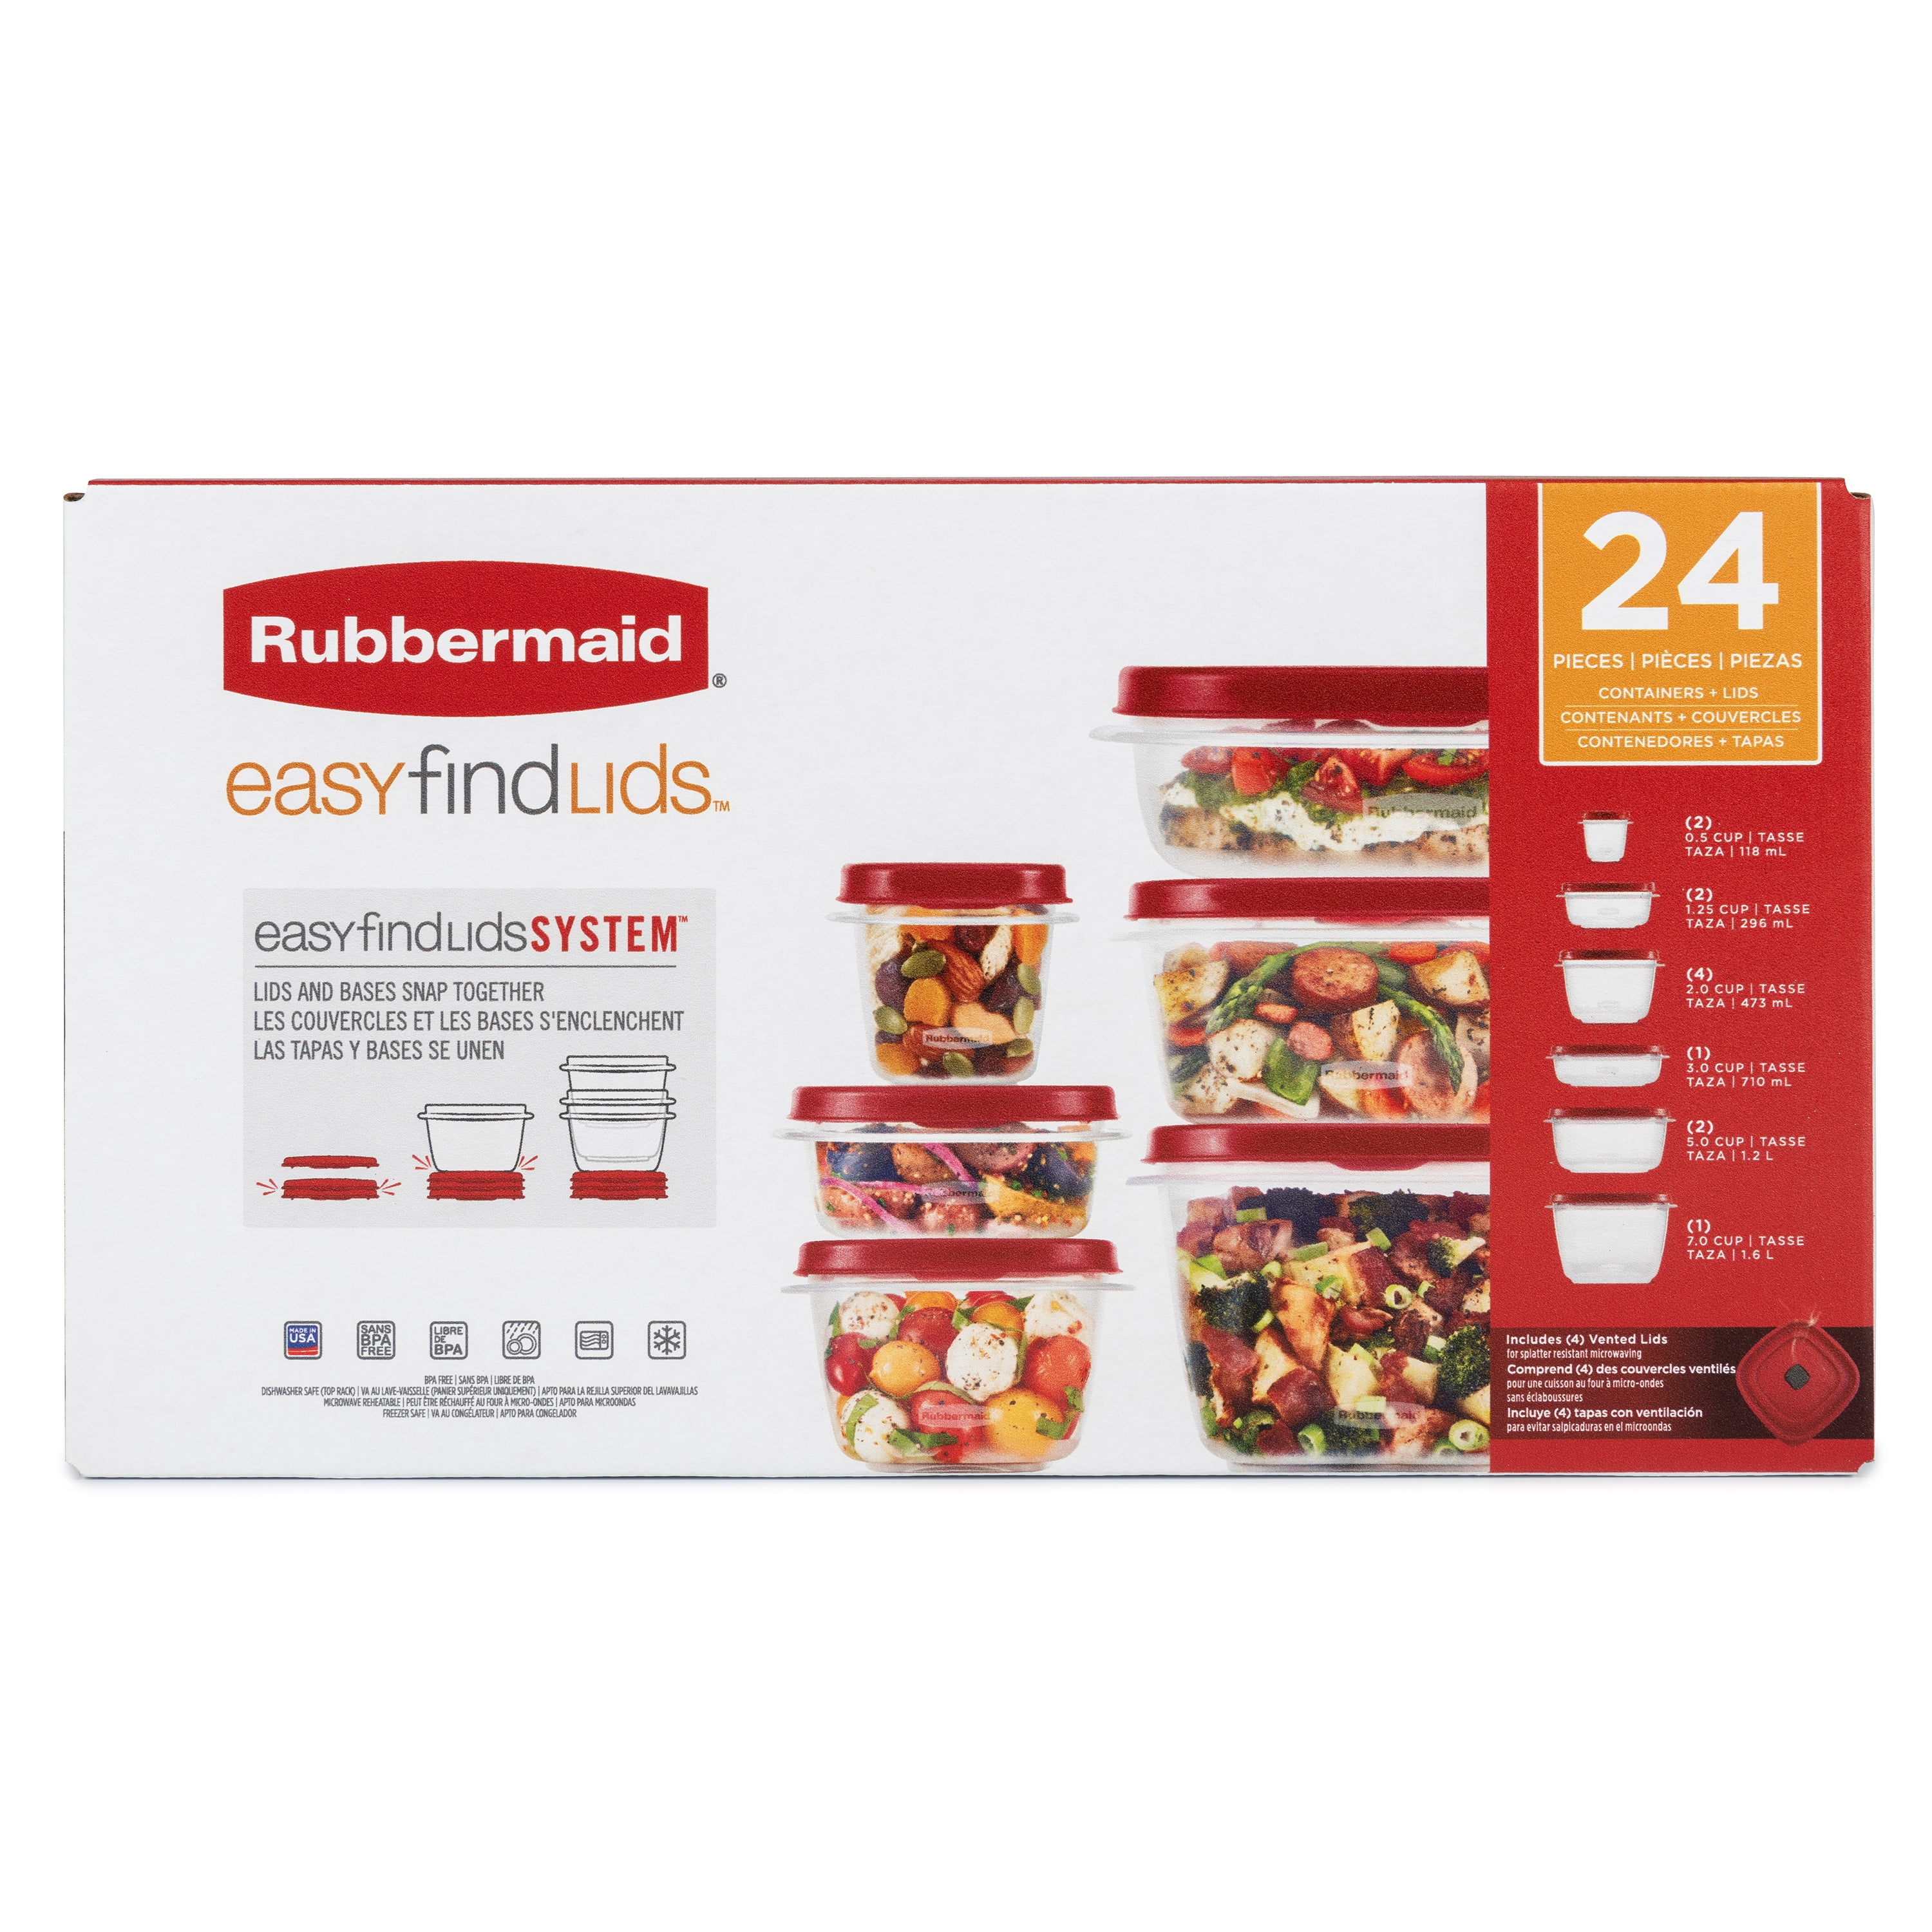  Rubbermaid 42-Piece Food Storage Containers with Lids, Salad  Dressing and Condiment Containers, and Steam Vents, Microwave and  Dishwasher Safe, Red (Pack of 21)